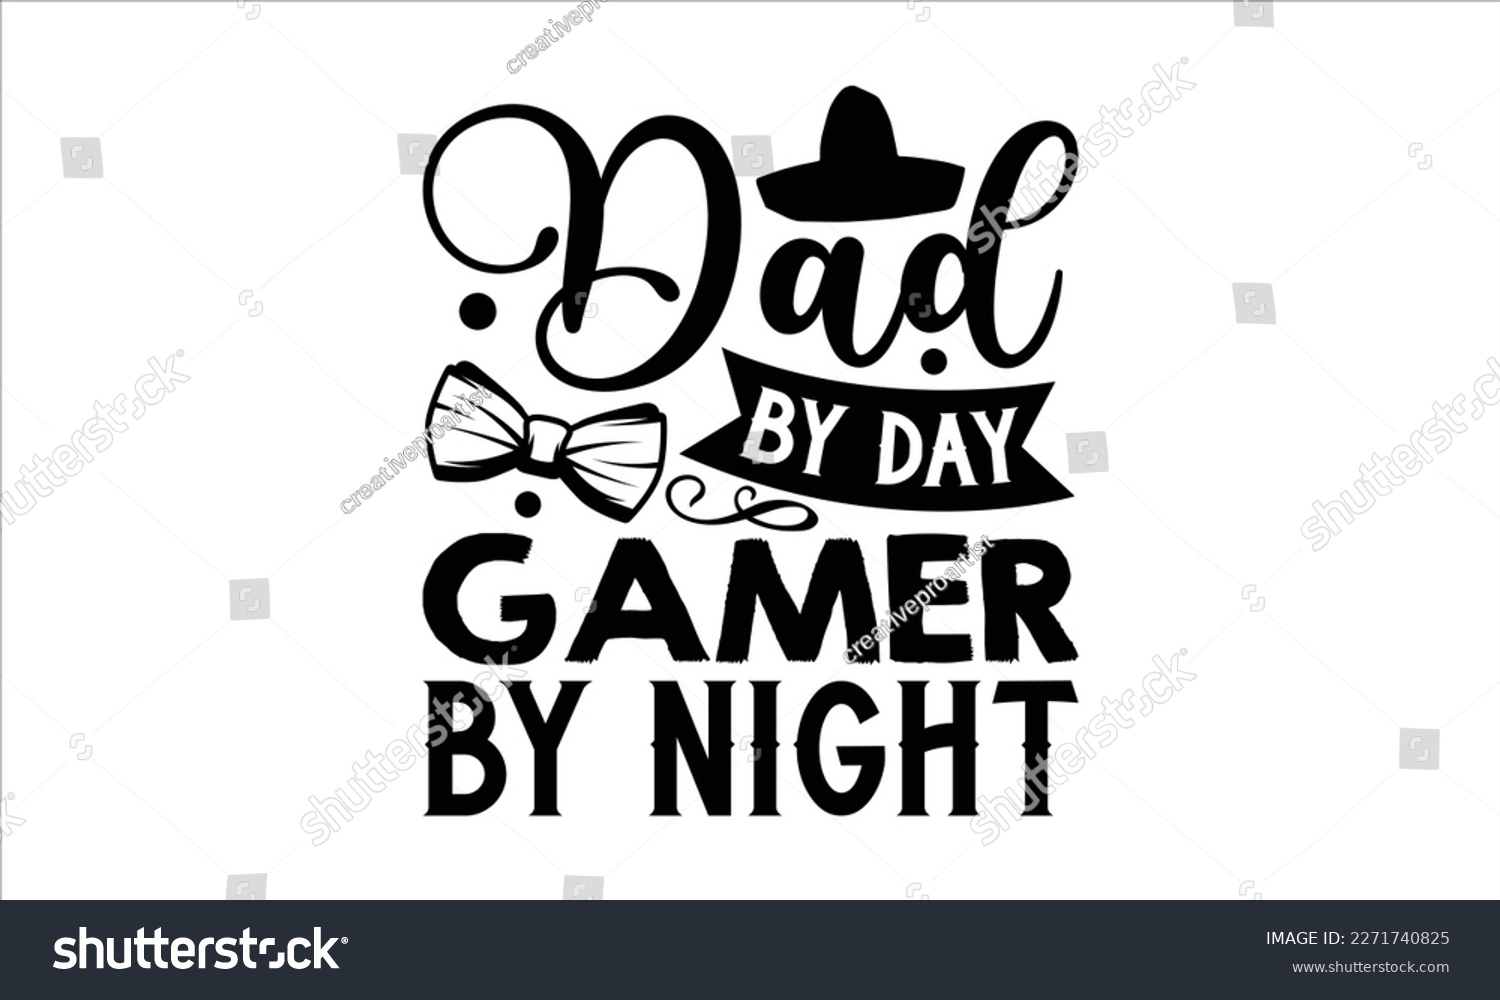 SVG of Dad by day gamer by night- Father's Day svg design, Hand drawn lettering phrase isolated on white background, Illustration for prints on t-shirts and bags, posters, cards eps 10. svg